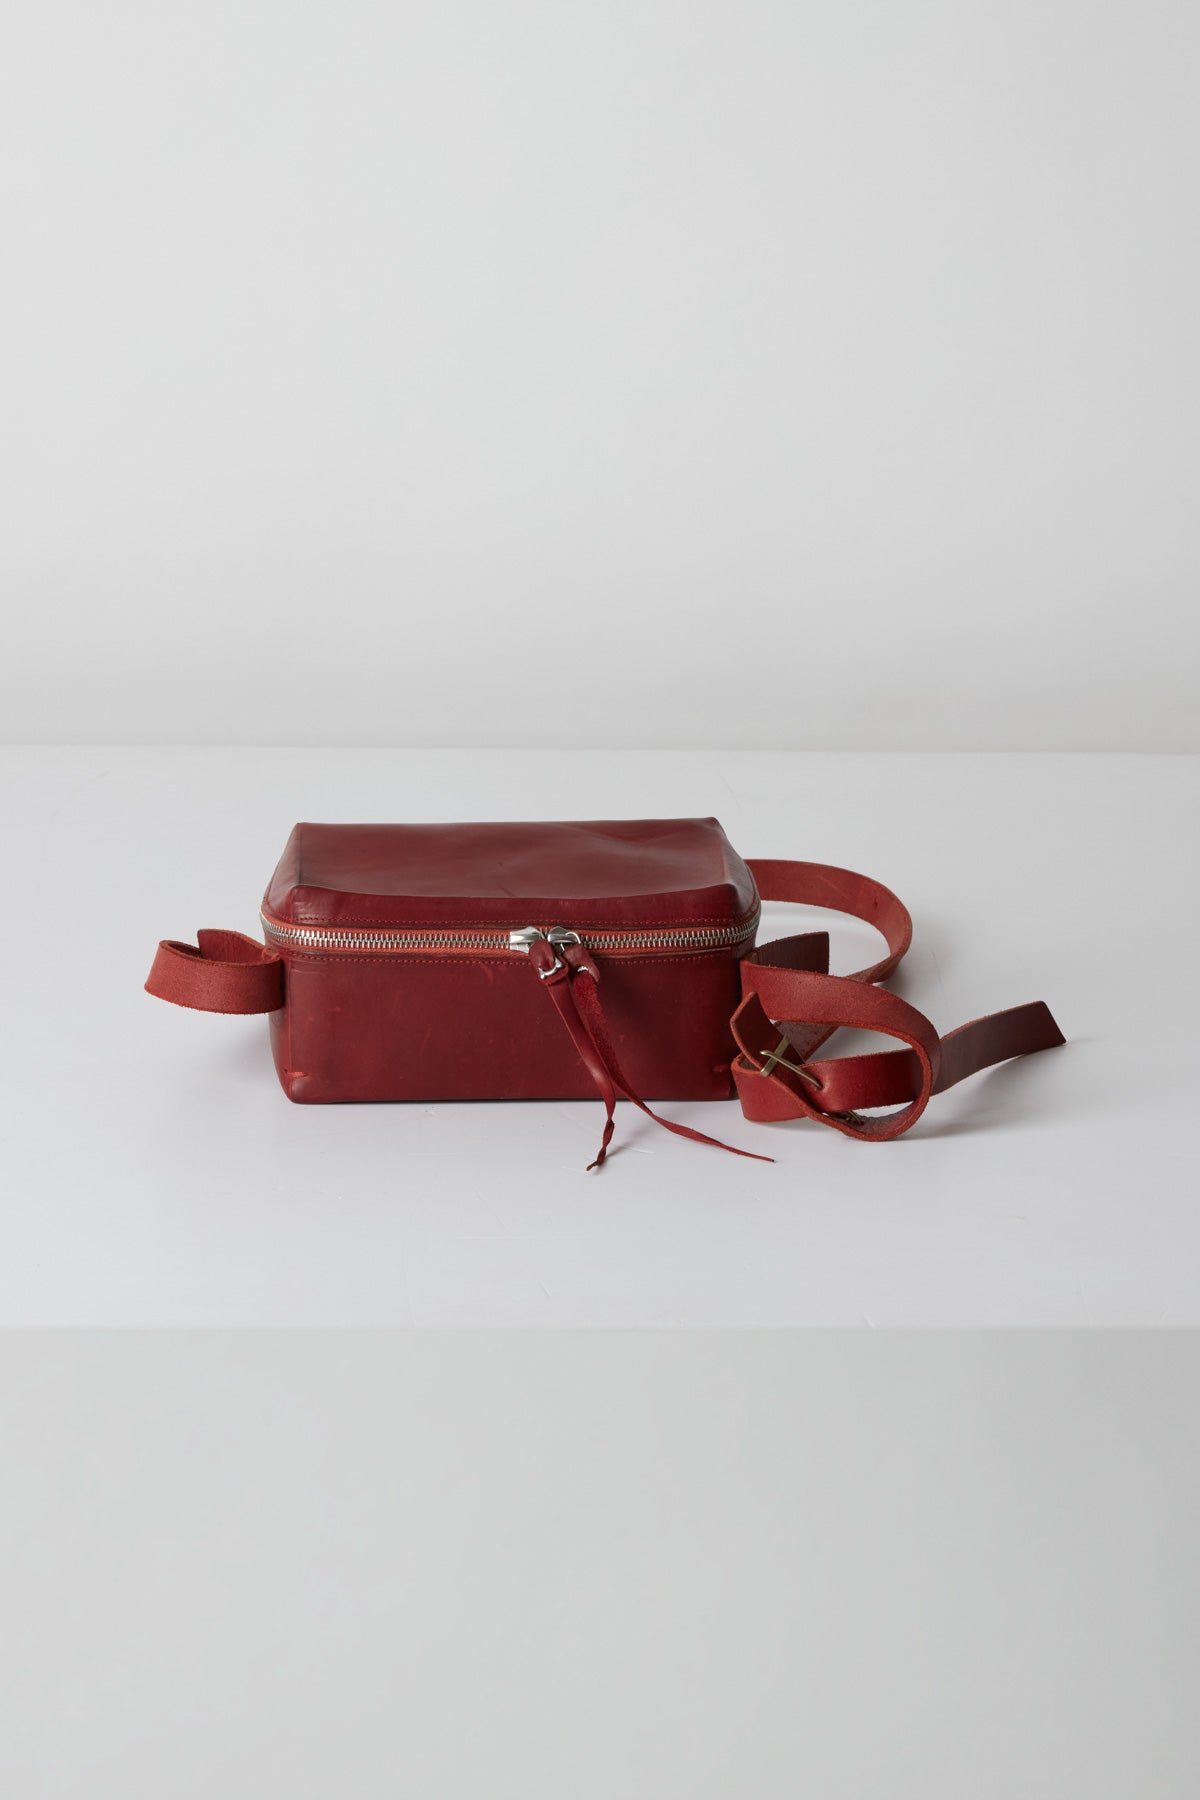 SMALL ZIPPED BRIEF CASE LONG STRAP